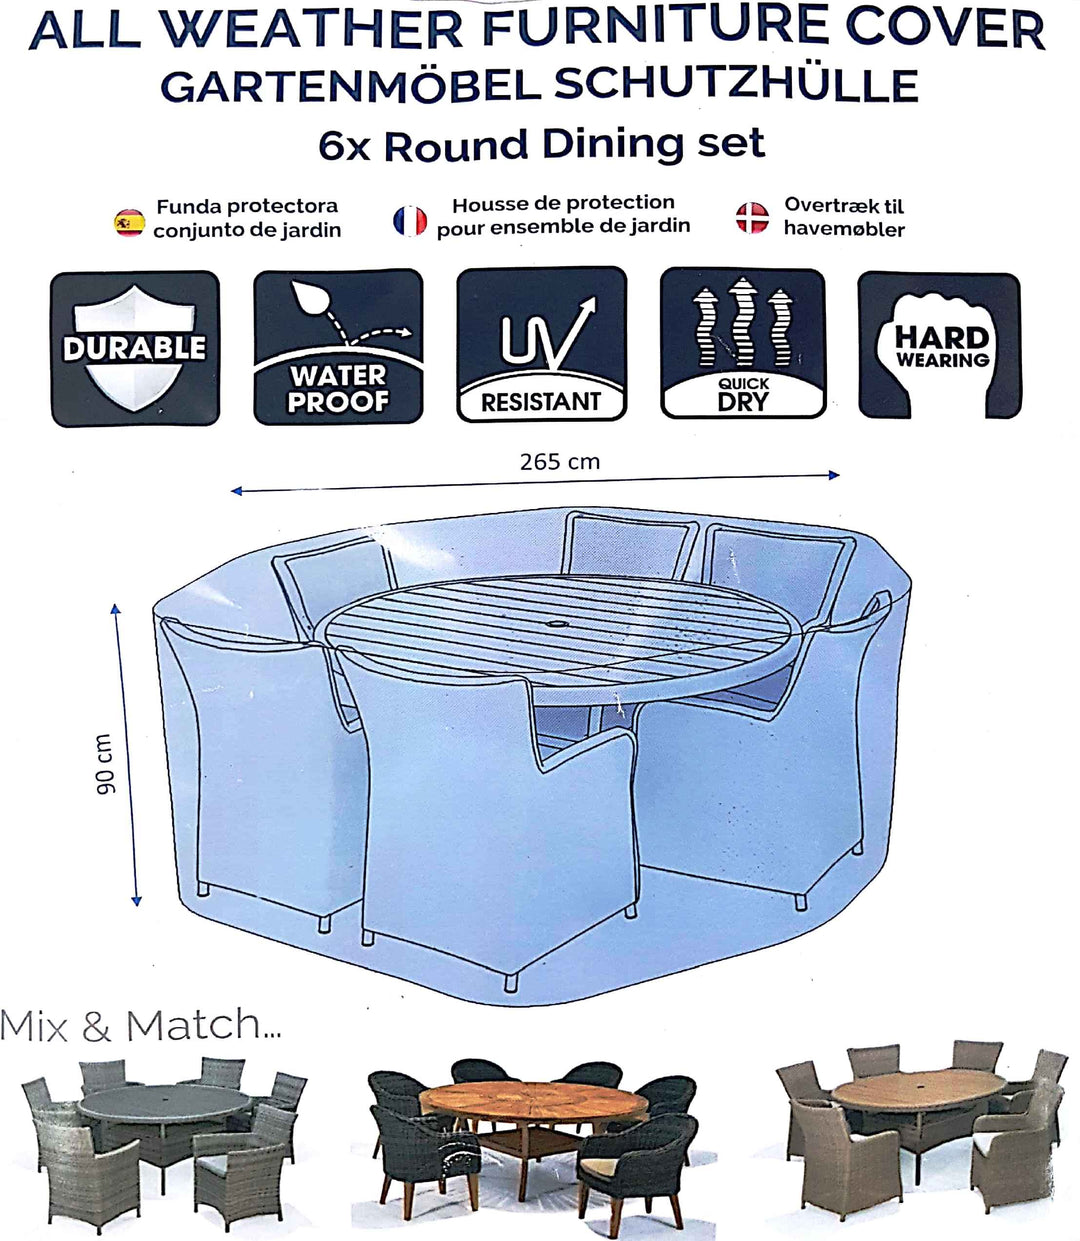 Deluxe 6 Seat Round Dining Set Cover